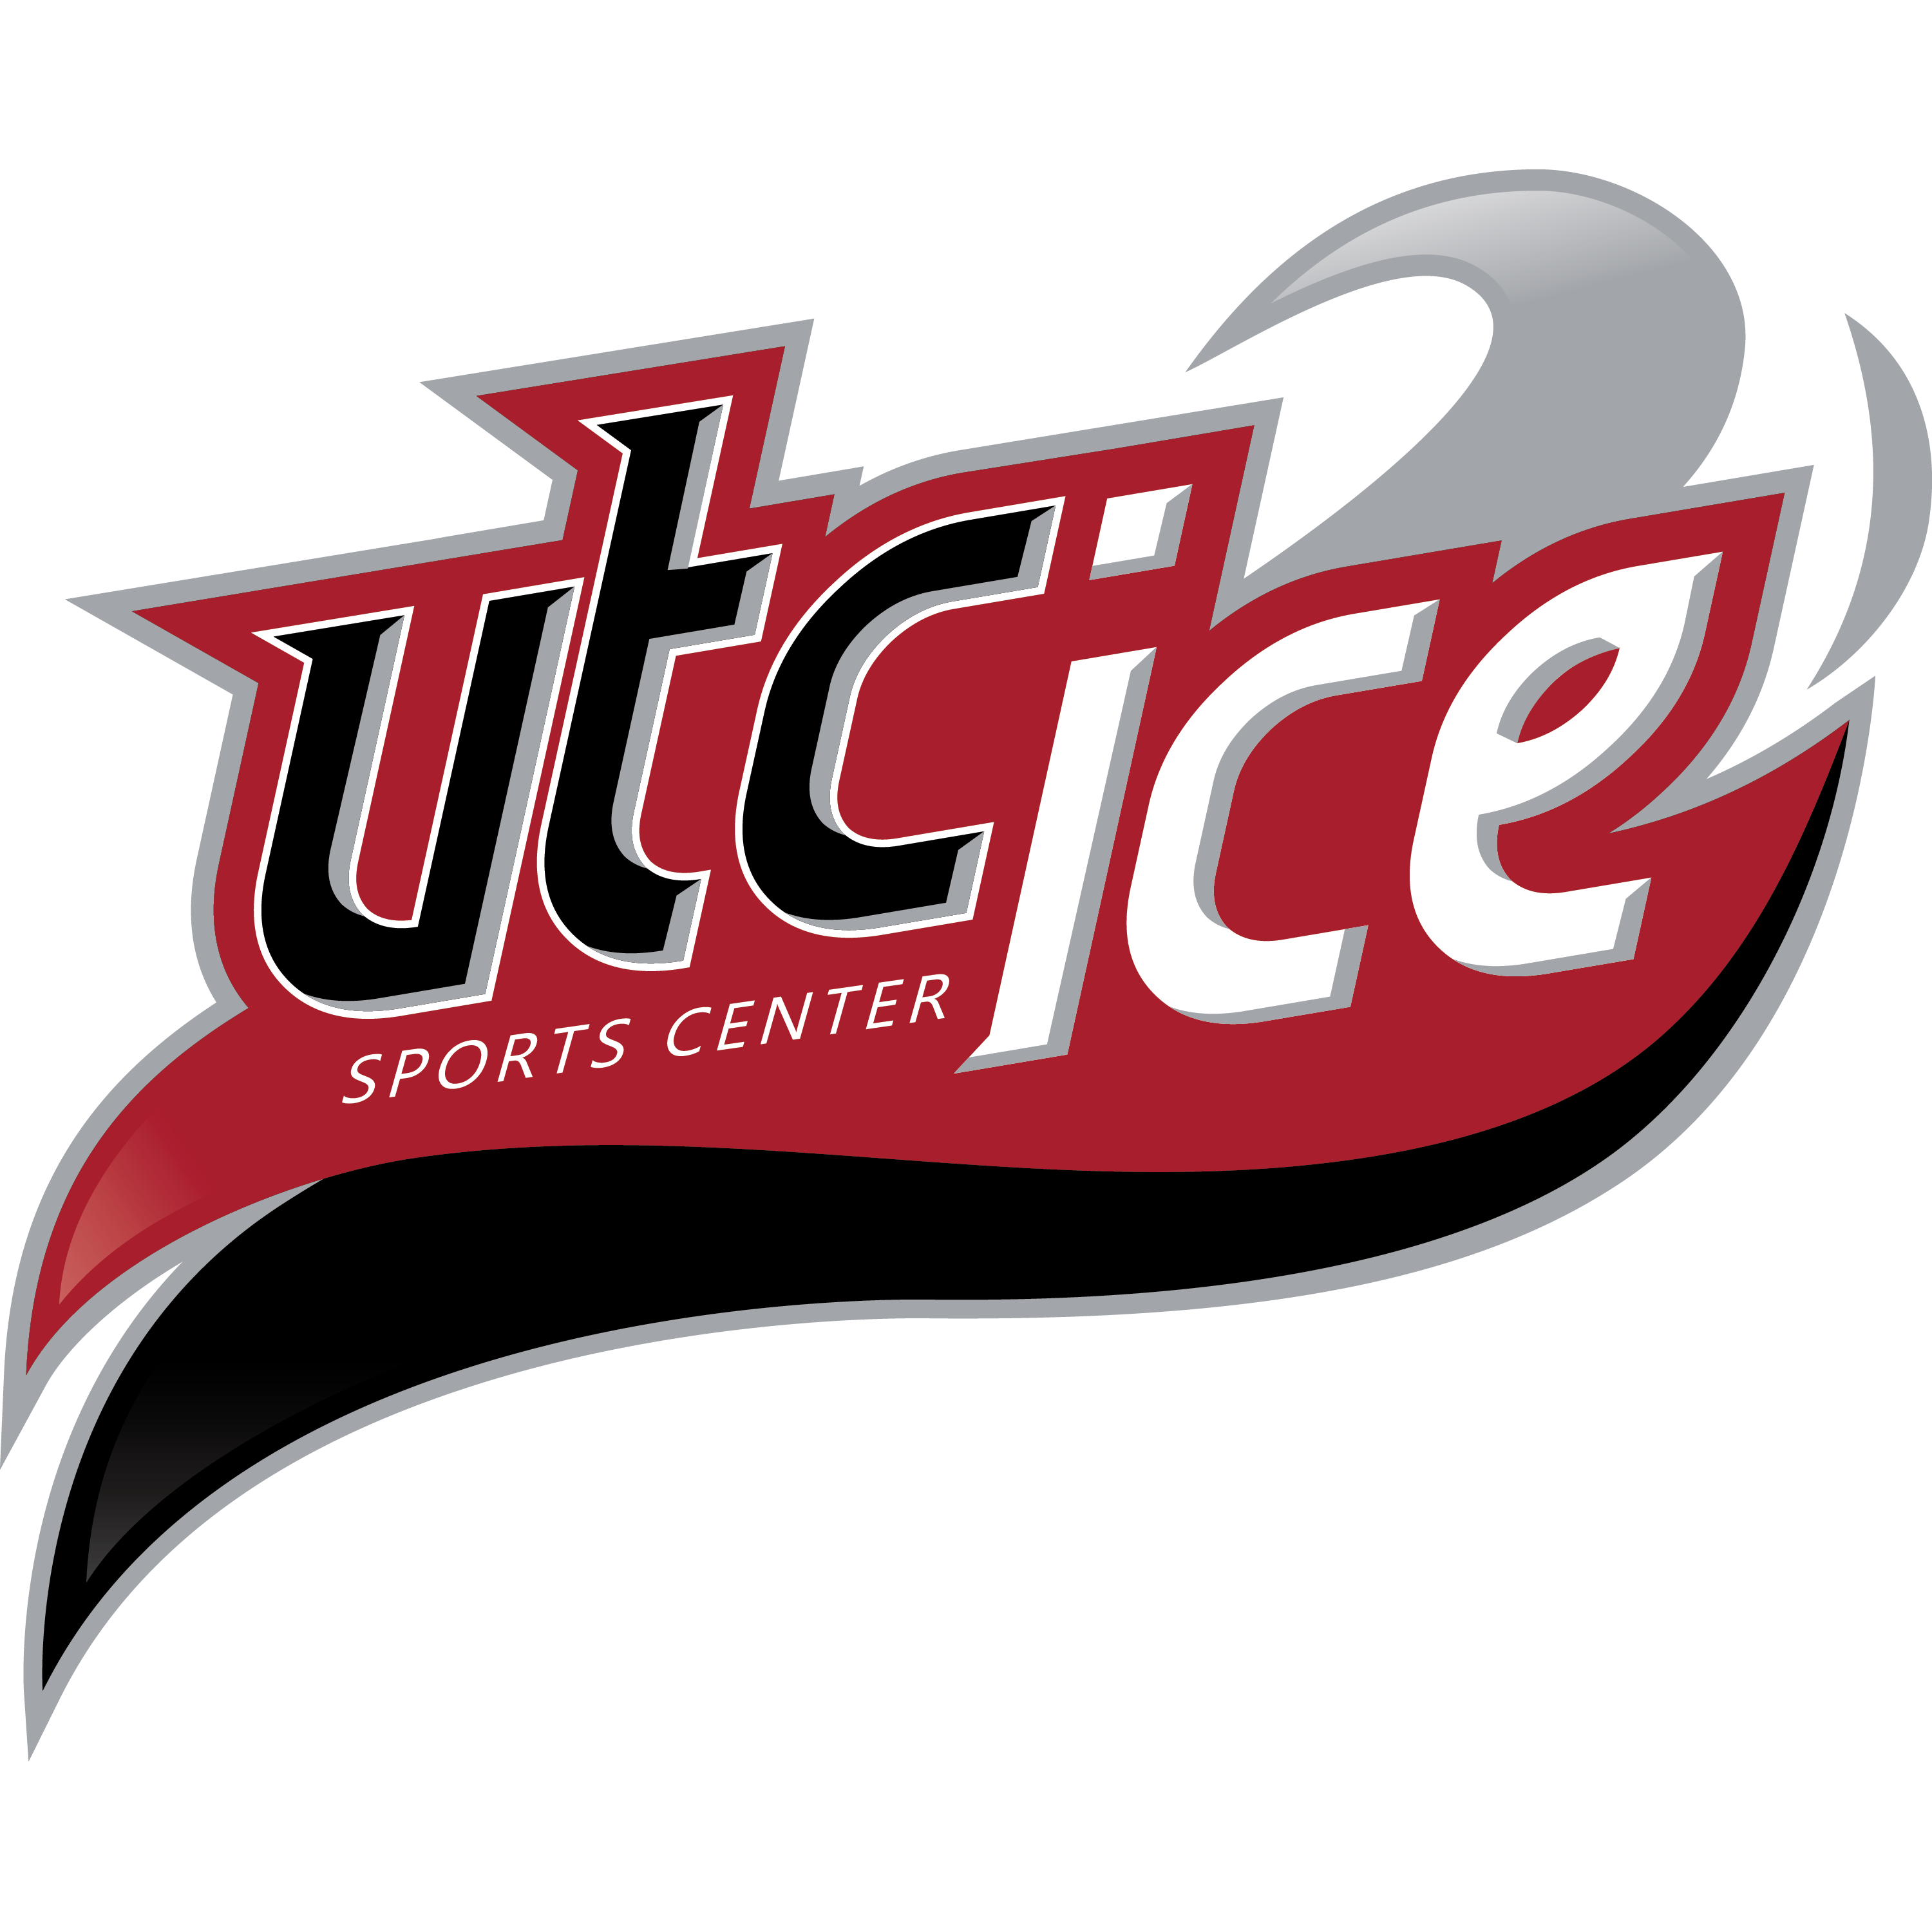 UTC ICE Coupons near me in San Diego, CA 92122 | 8coupons